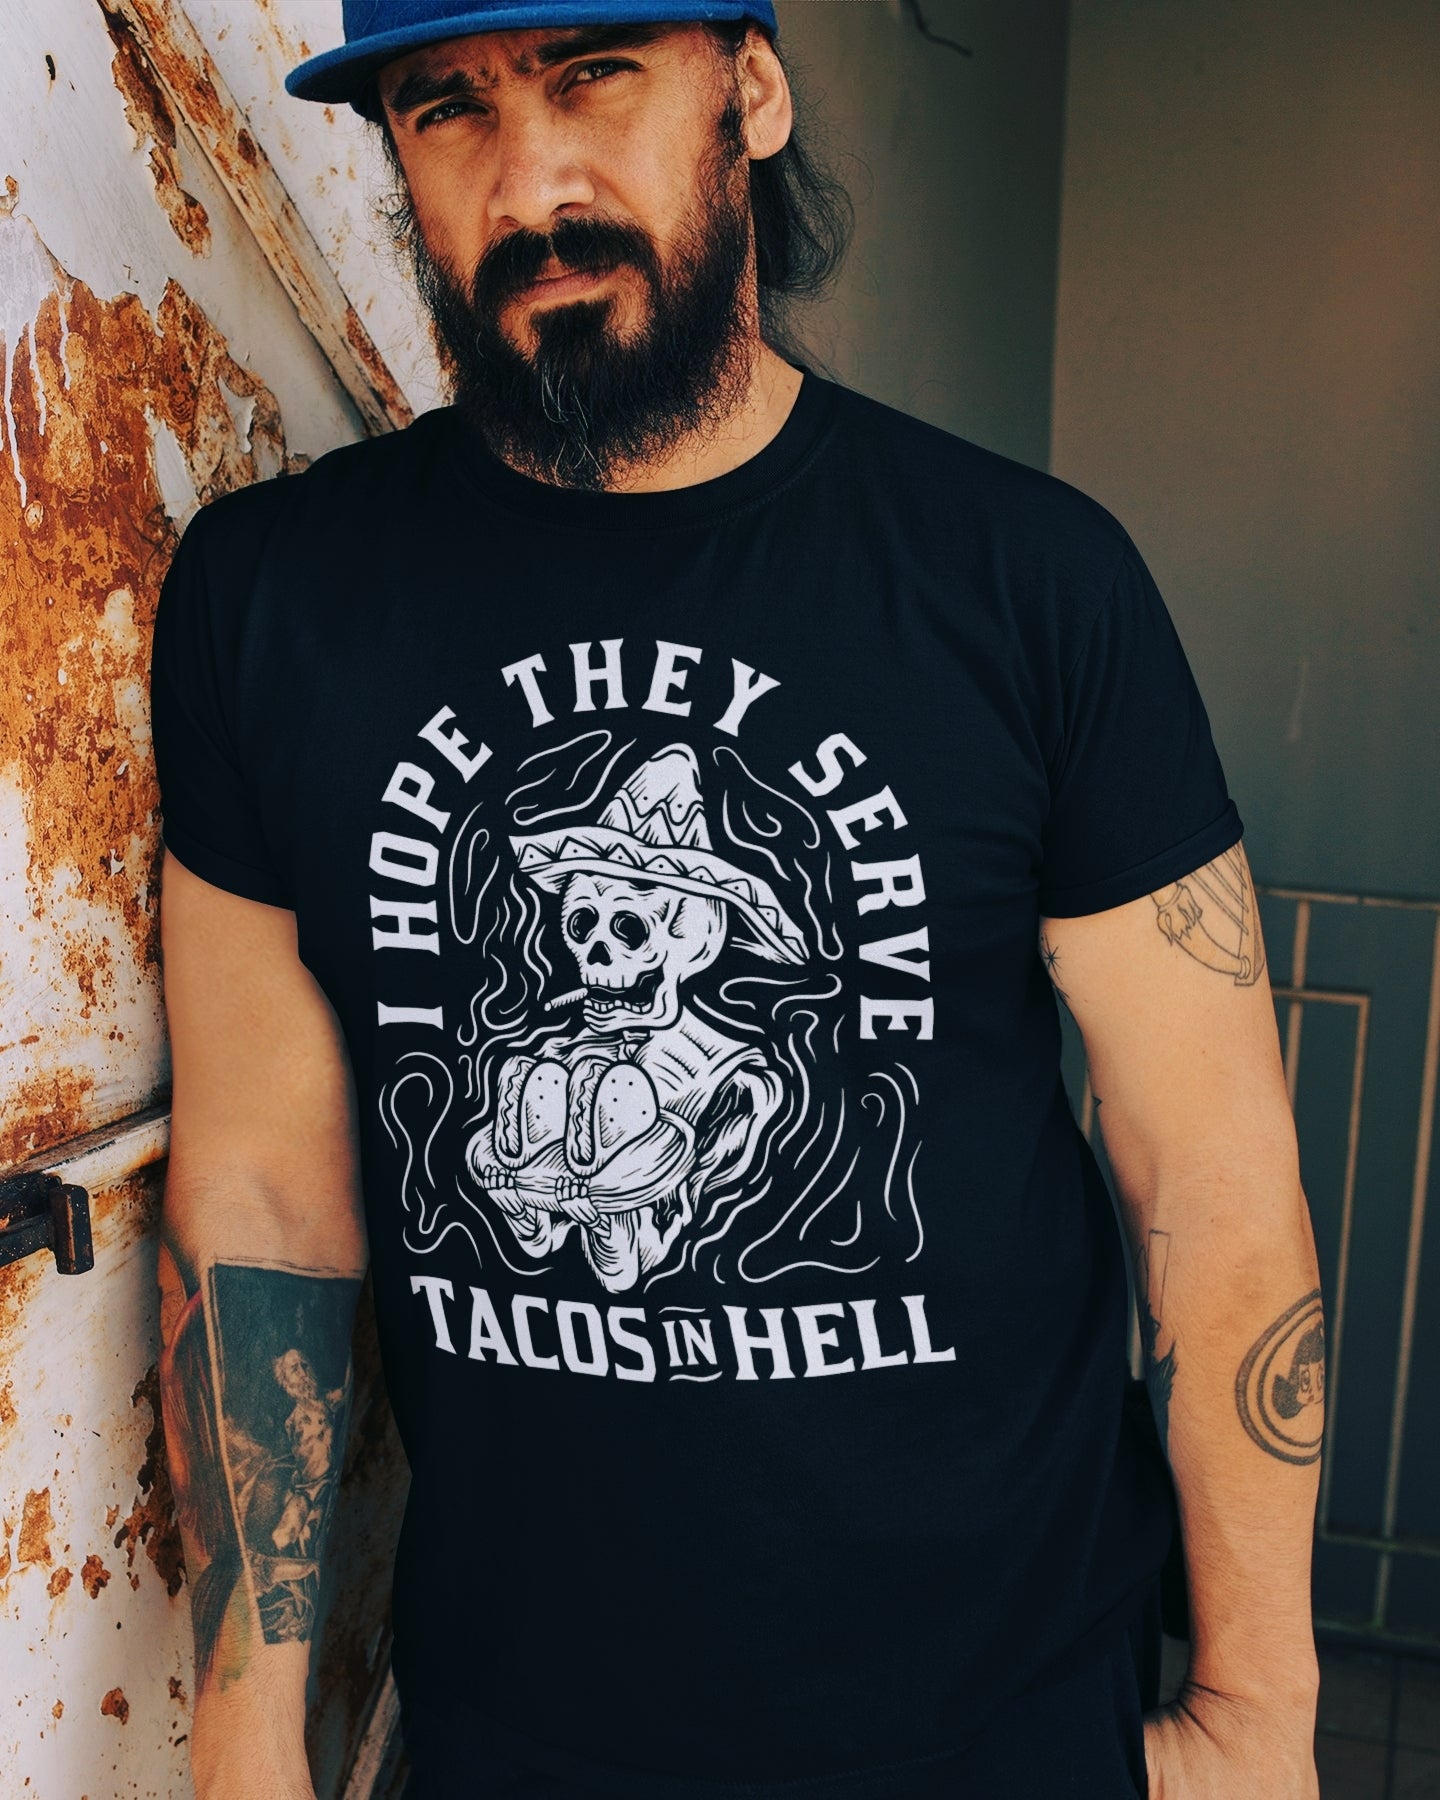 latino wearing a Funny t-shirt with a tattoo-style cartoon of a skeleton serving tacos and smoking, captioned 'I hope they serve tacos in hell.'